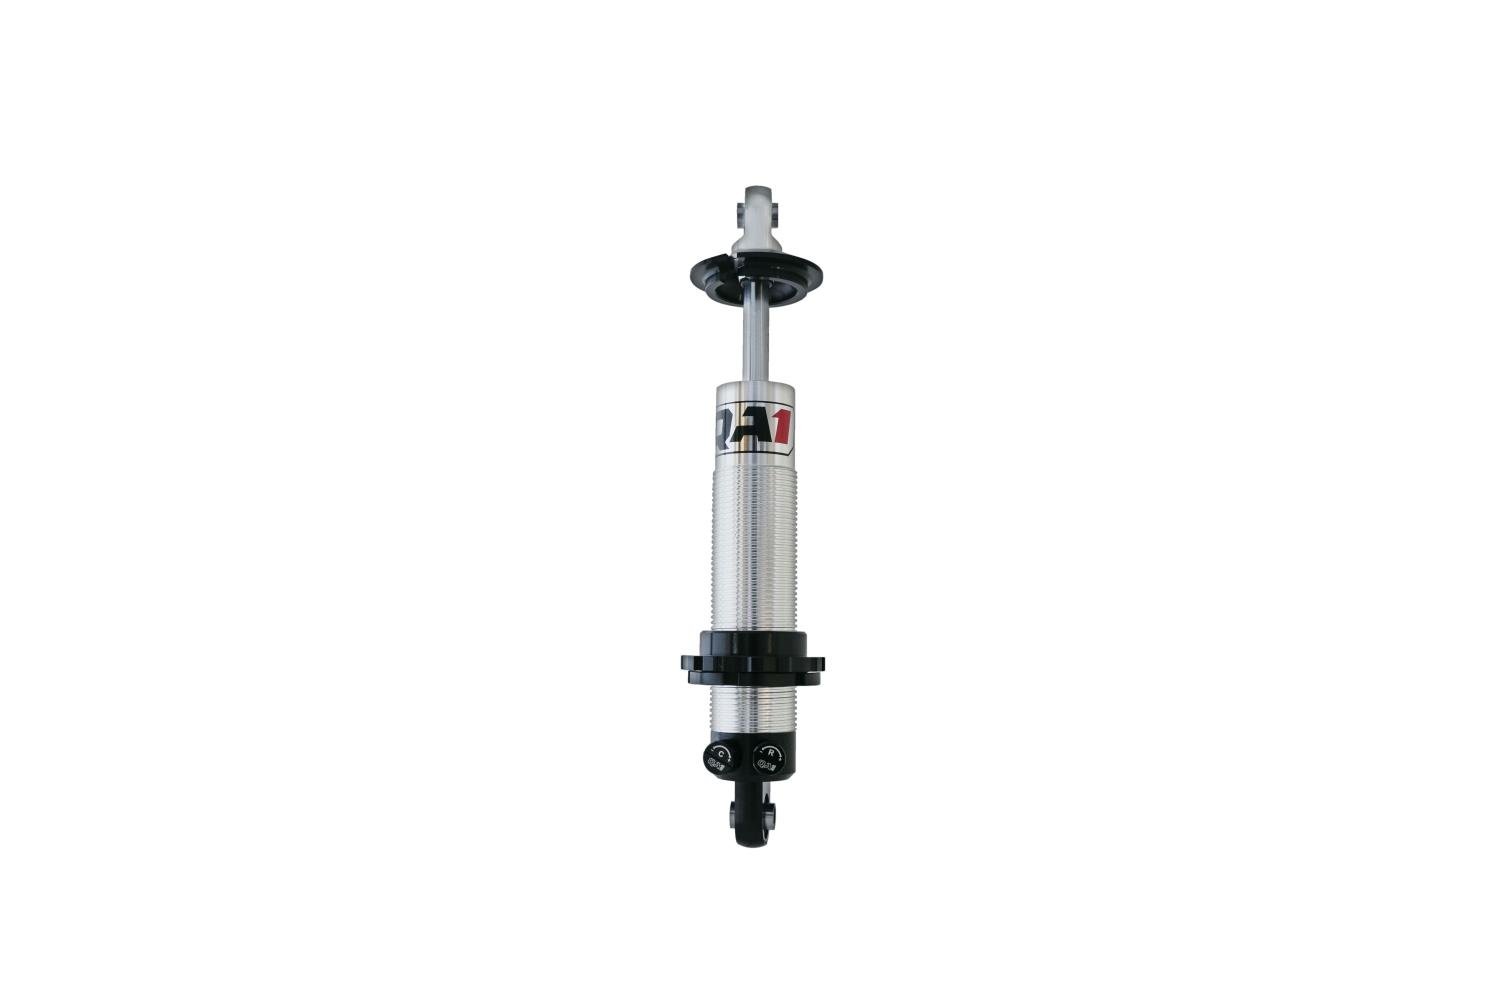 Double Adjustable Shock Compressed Height: 8-5/8"